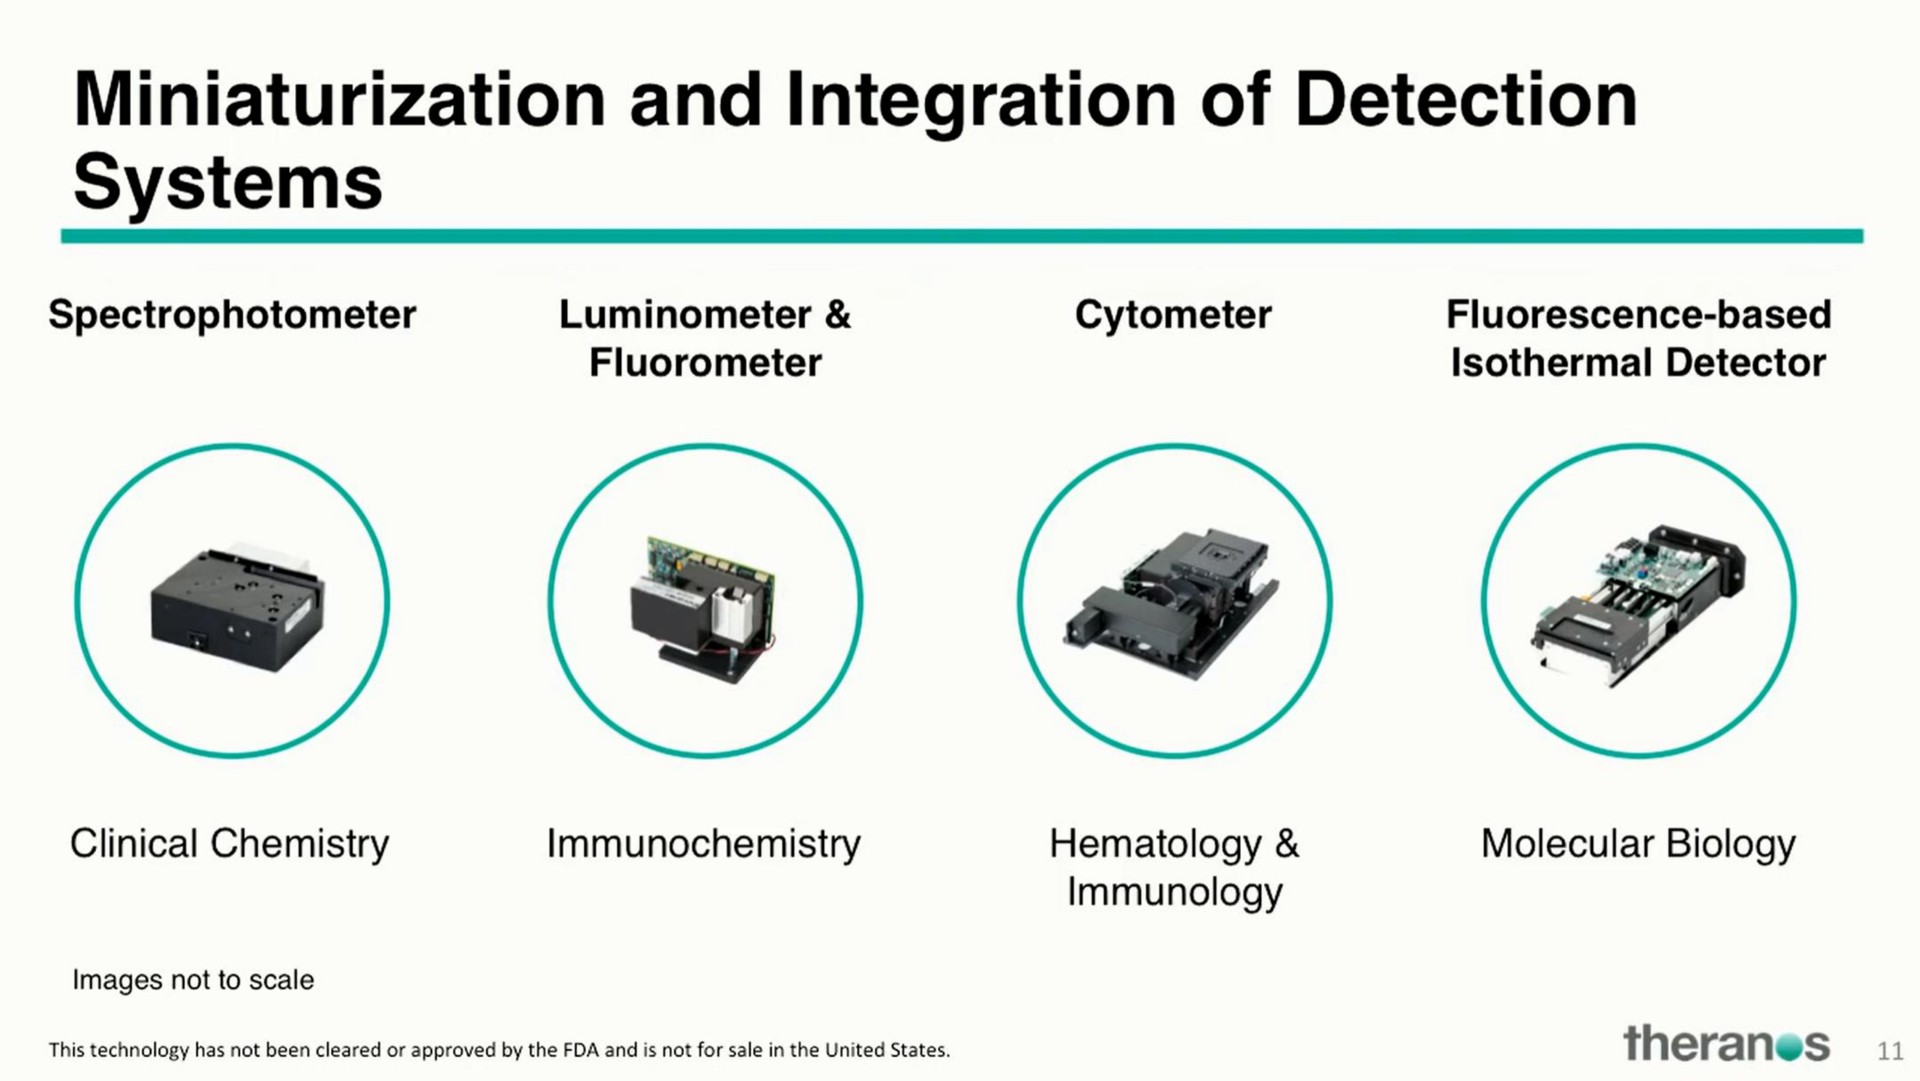 and integration of detection systems | Theranos